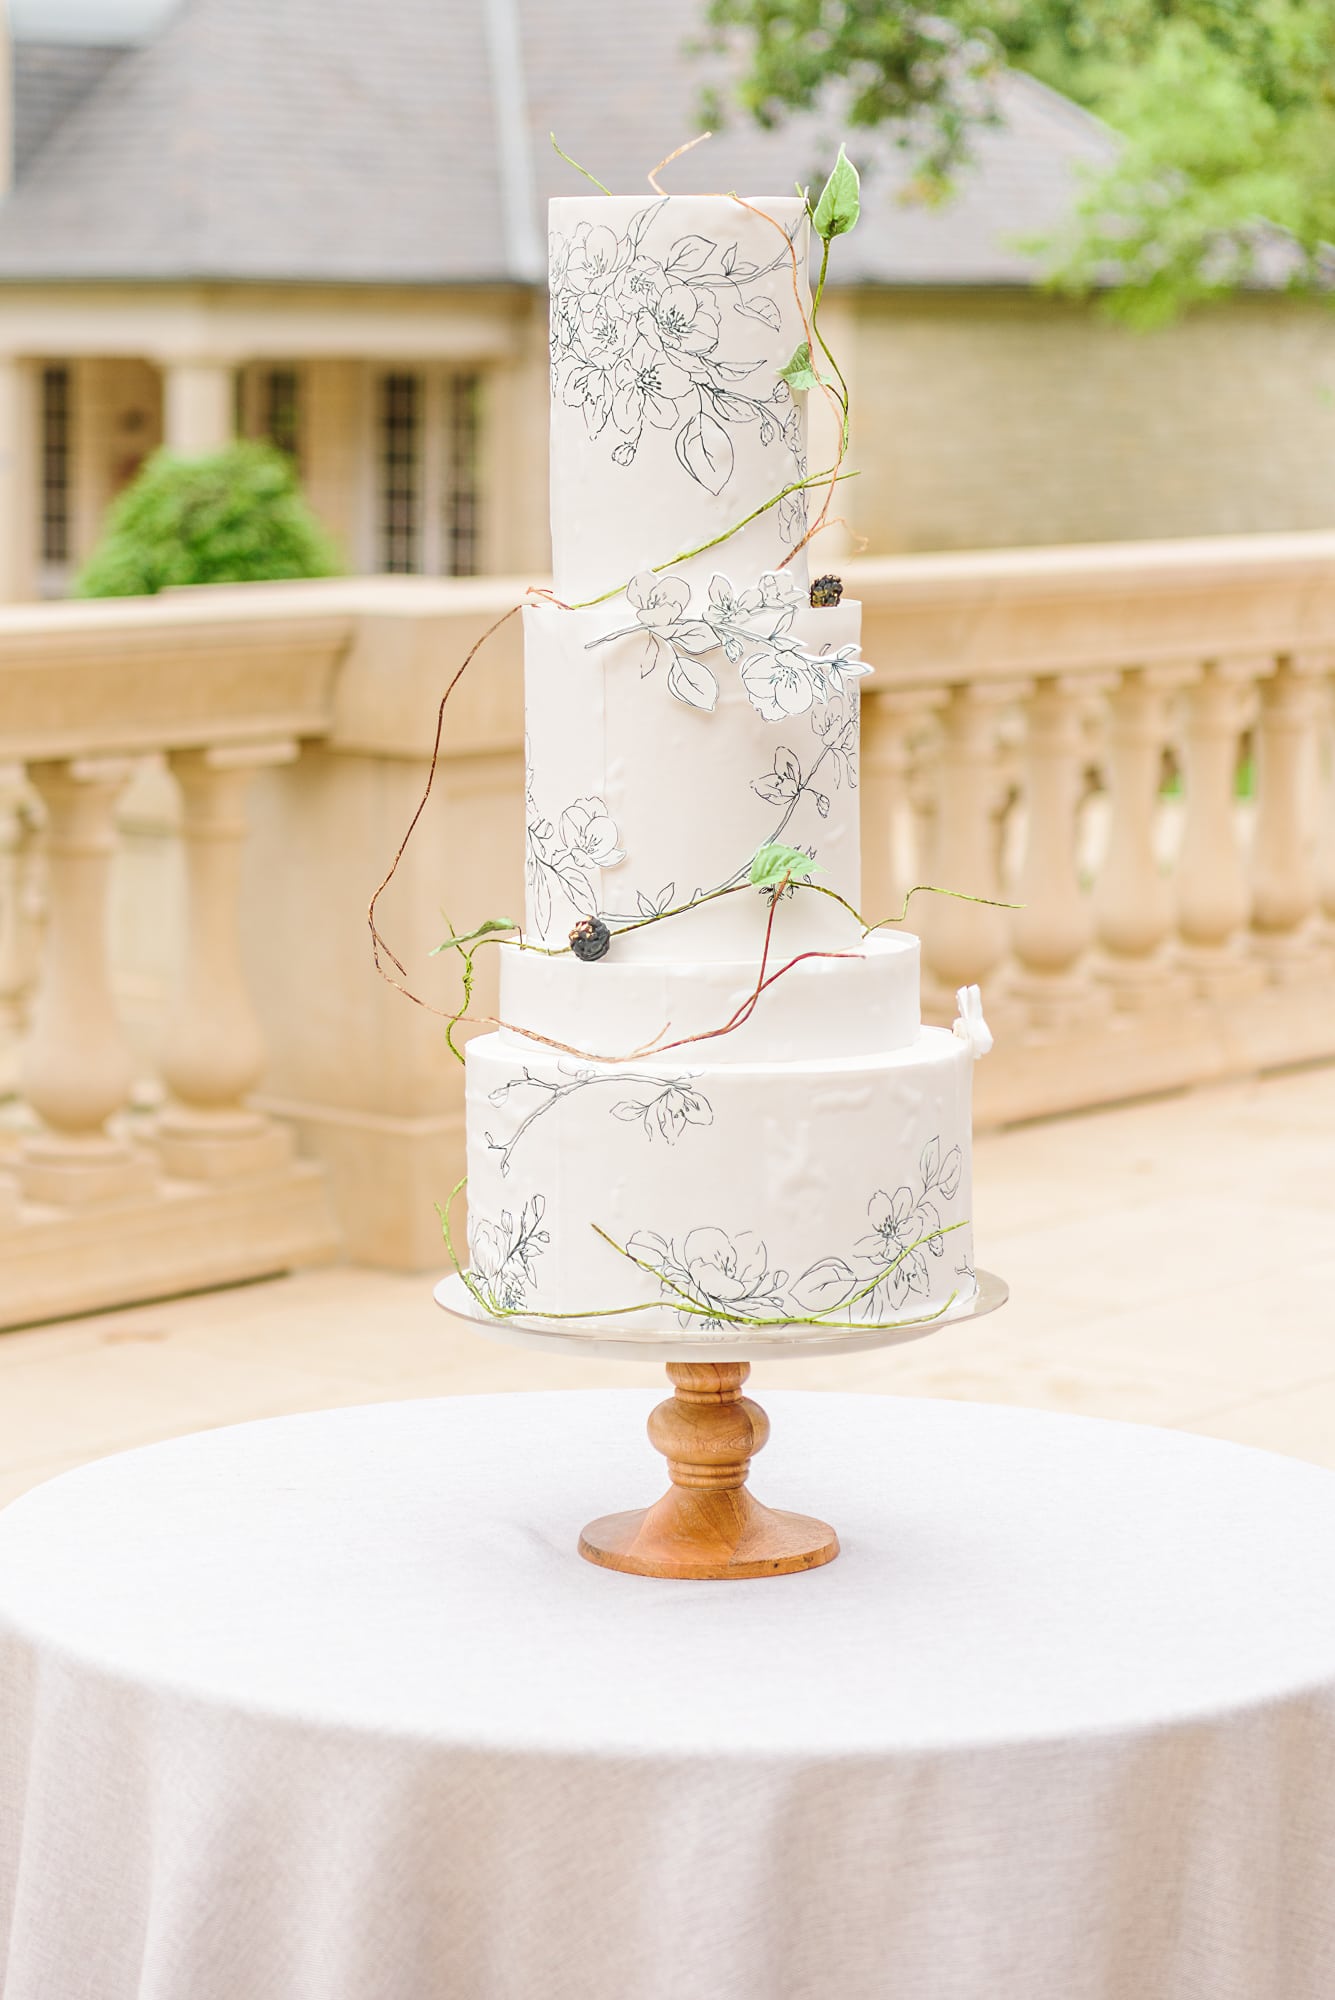 Consider your cake while brainstorming ideas for an outdoor wedding.